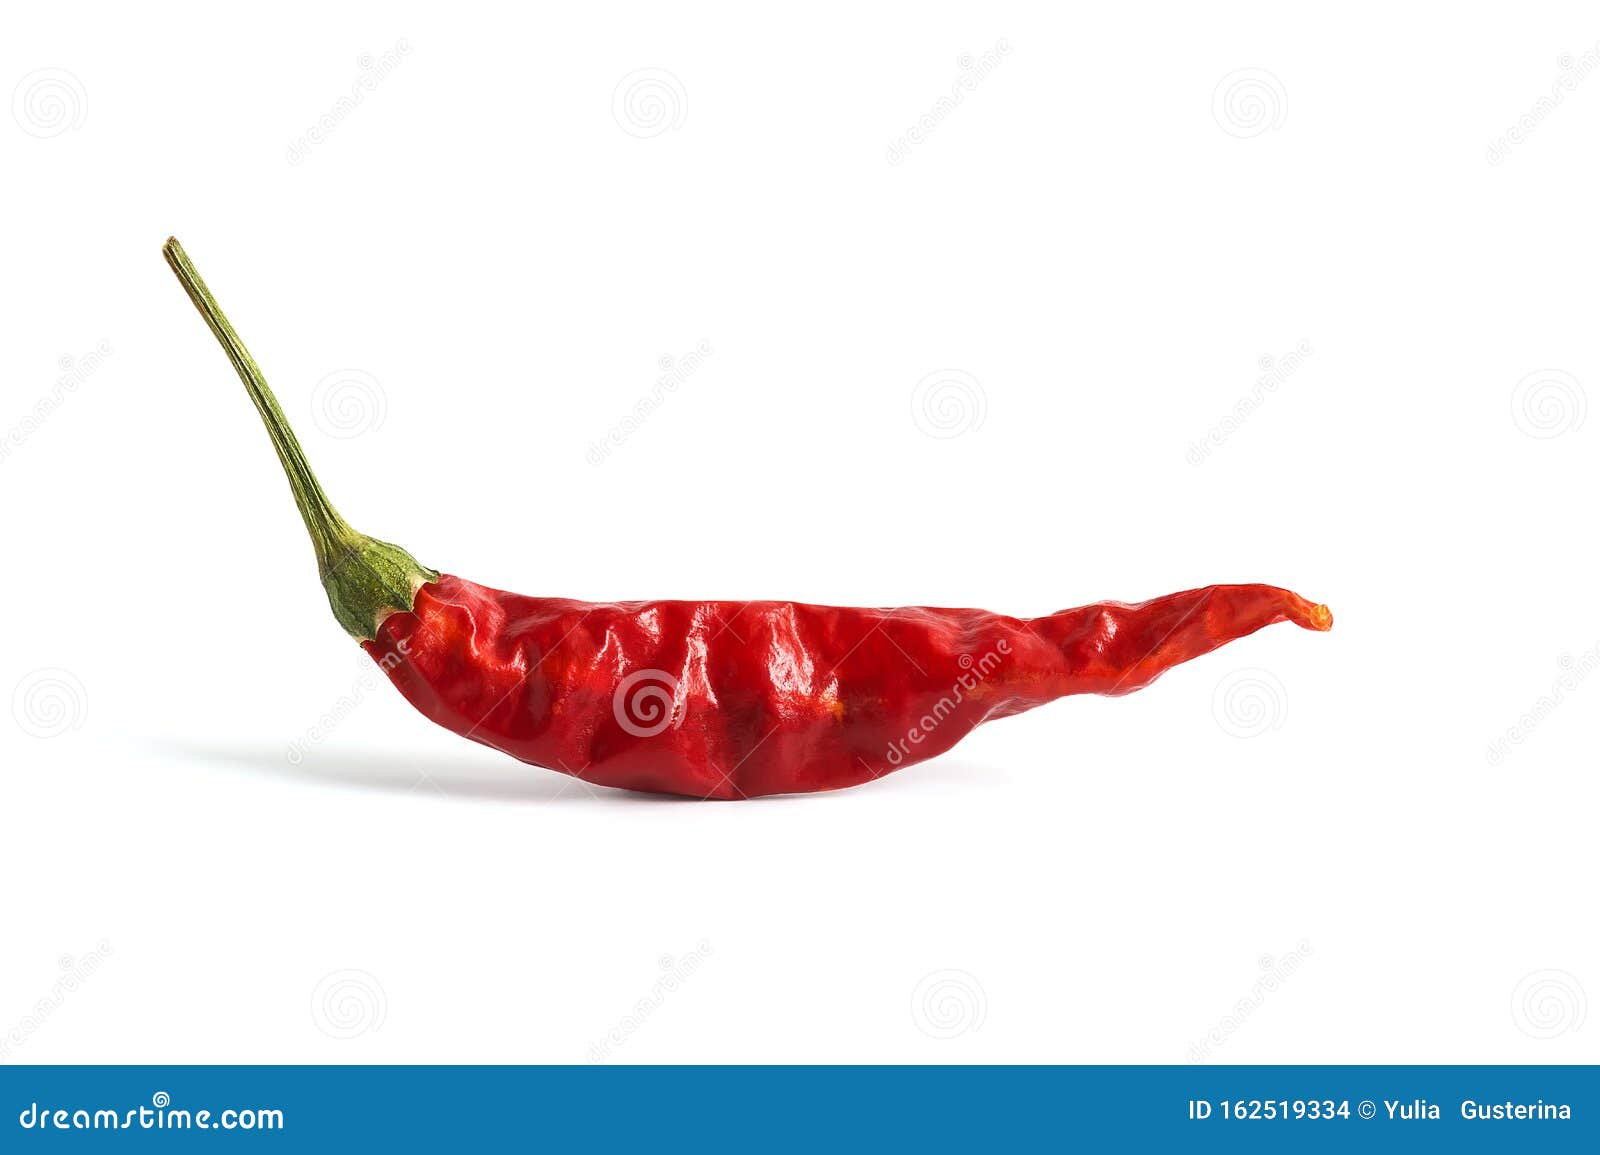 red dried chili peppers on a white background . hot pepper